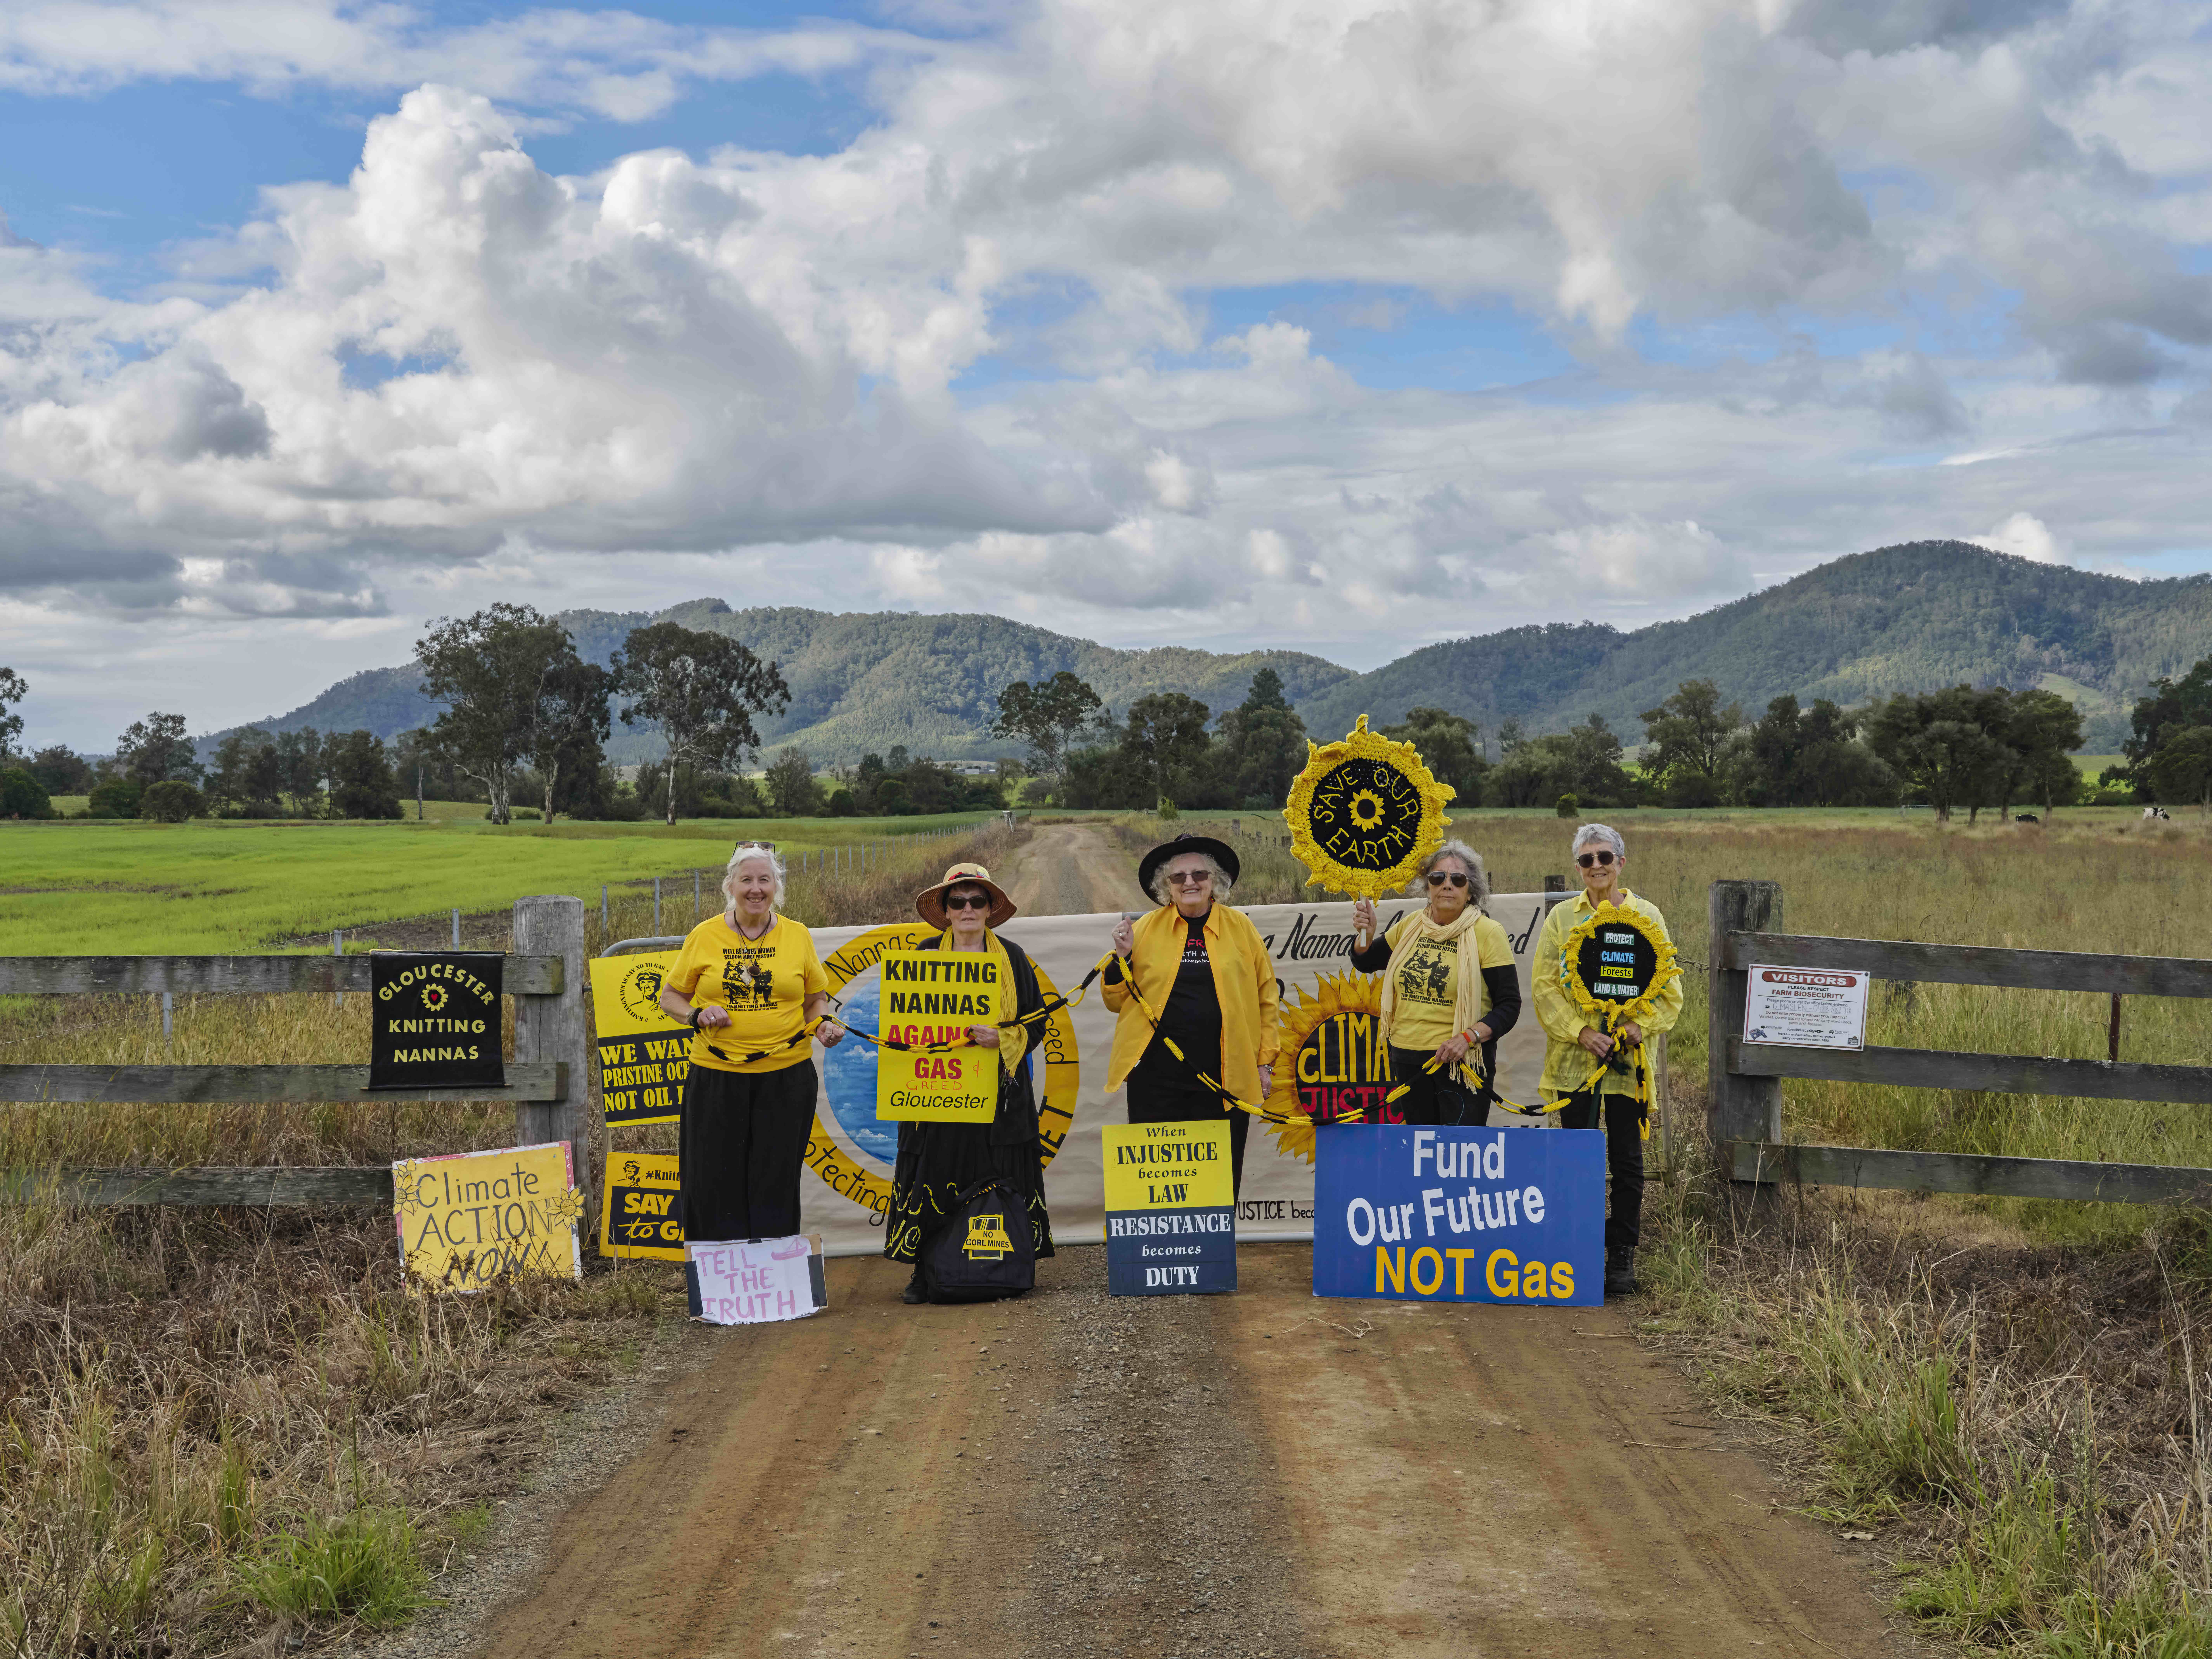 Five of the Knitting Nannas stand in front of a fence, each wearing at least one item of yellow clothing and holding signs from various protests they've participated in. 